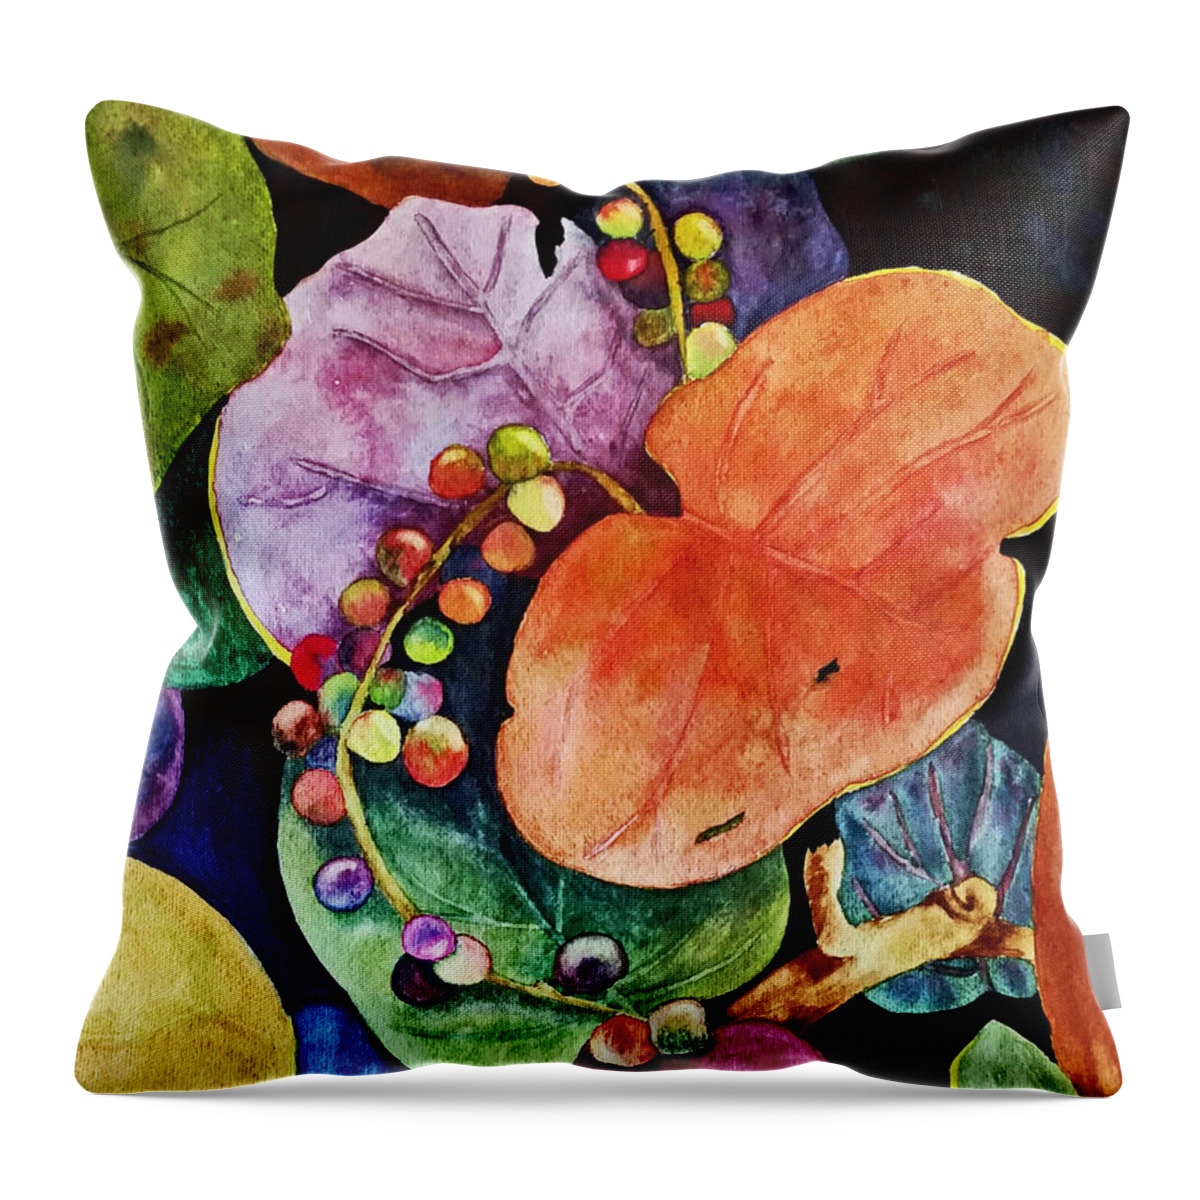 Seagrapes Throw Pillow featuring the painting Autumn Sea Grapes by Terri Mills